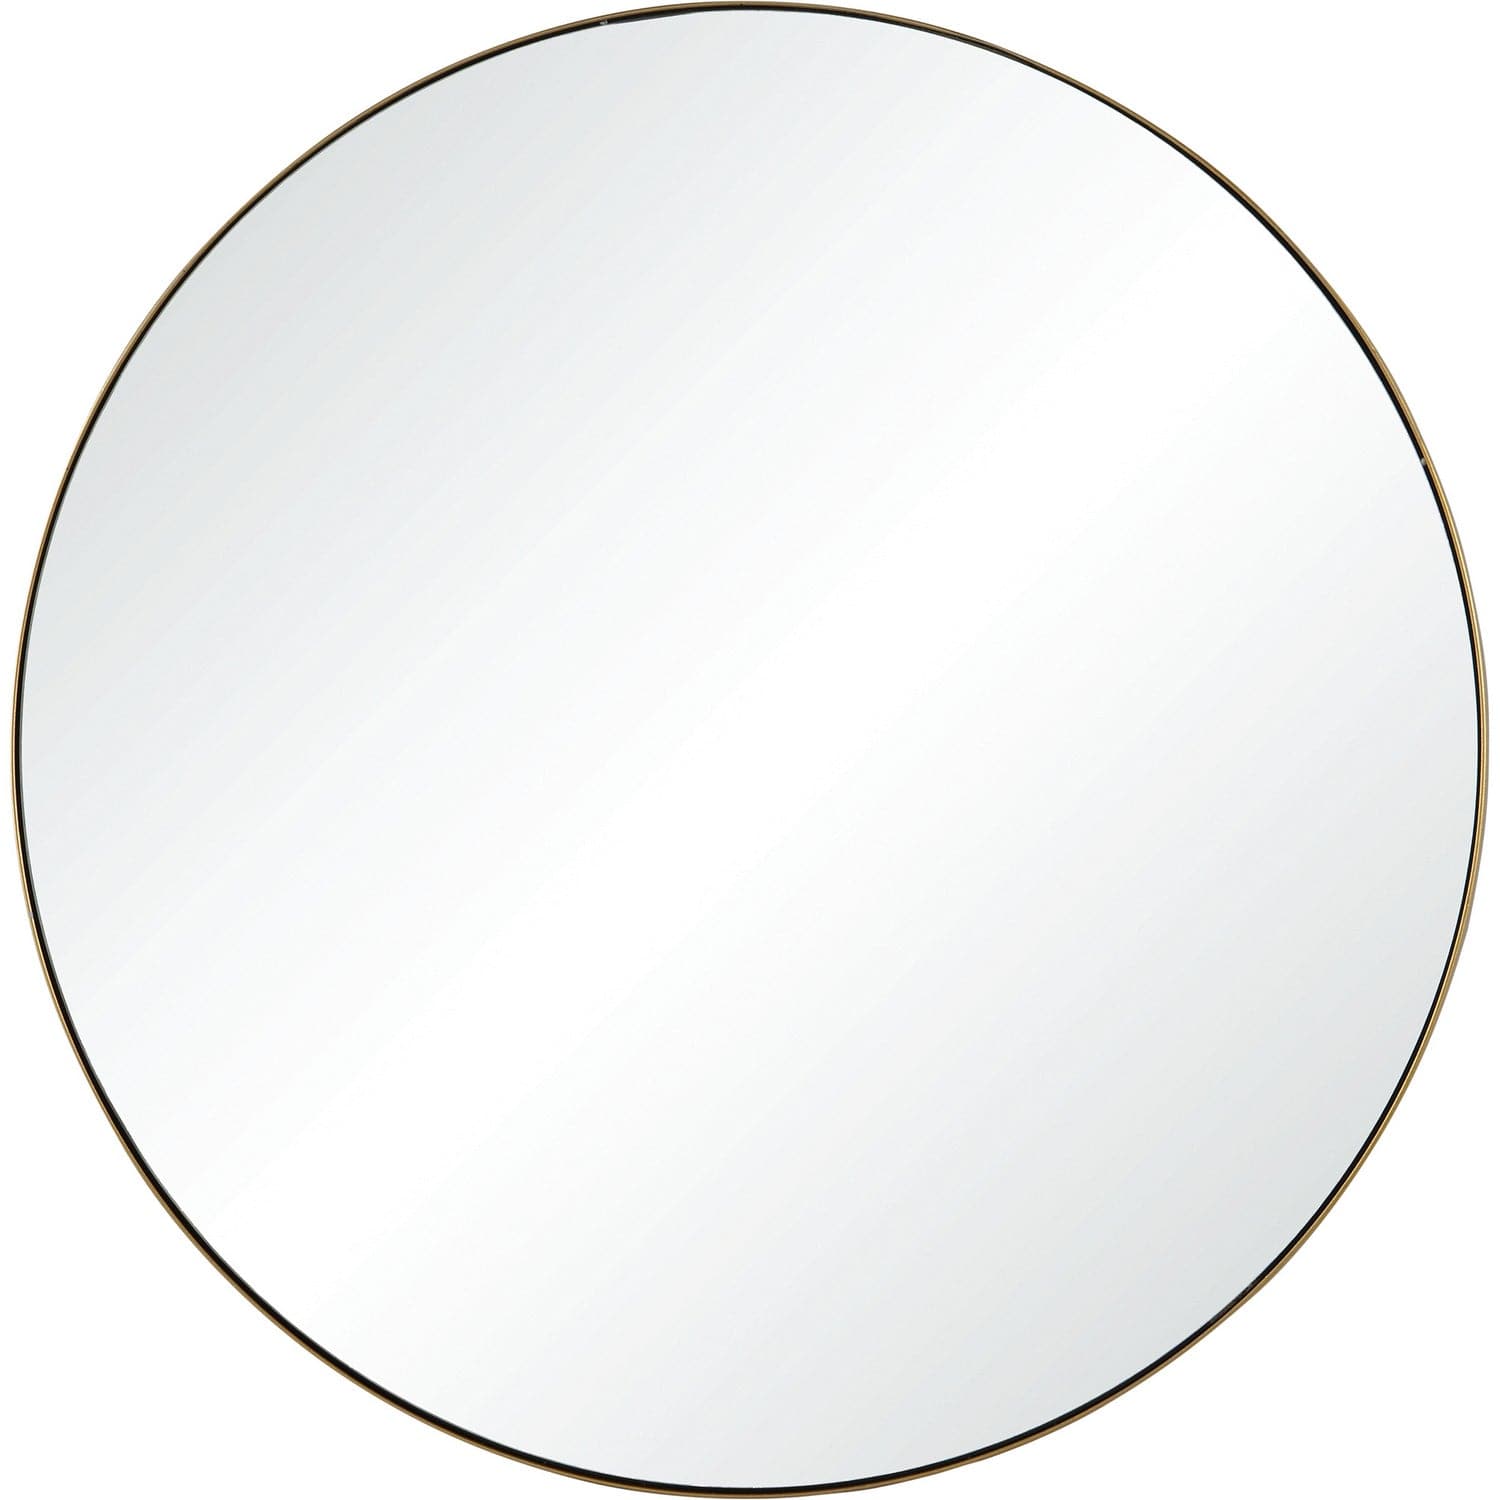 Renwil - MT2331 - Mirrors/Pictures - Mirrors-Oval/Rd.